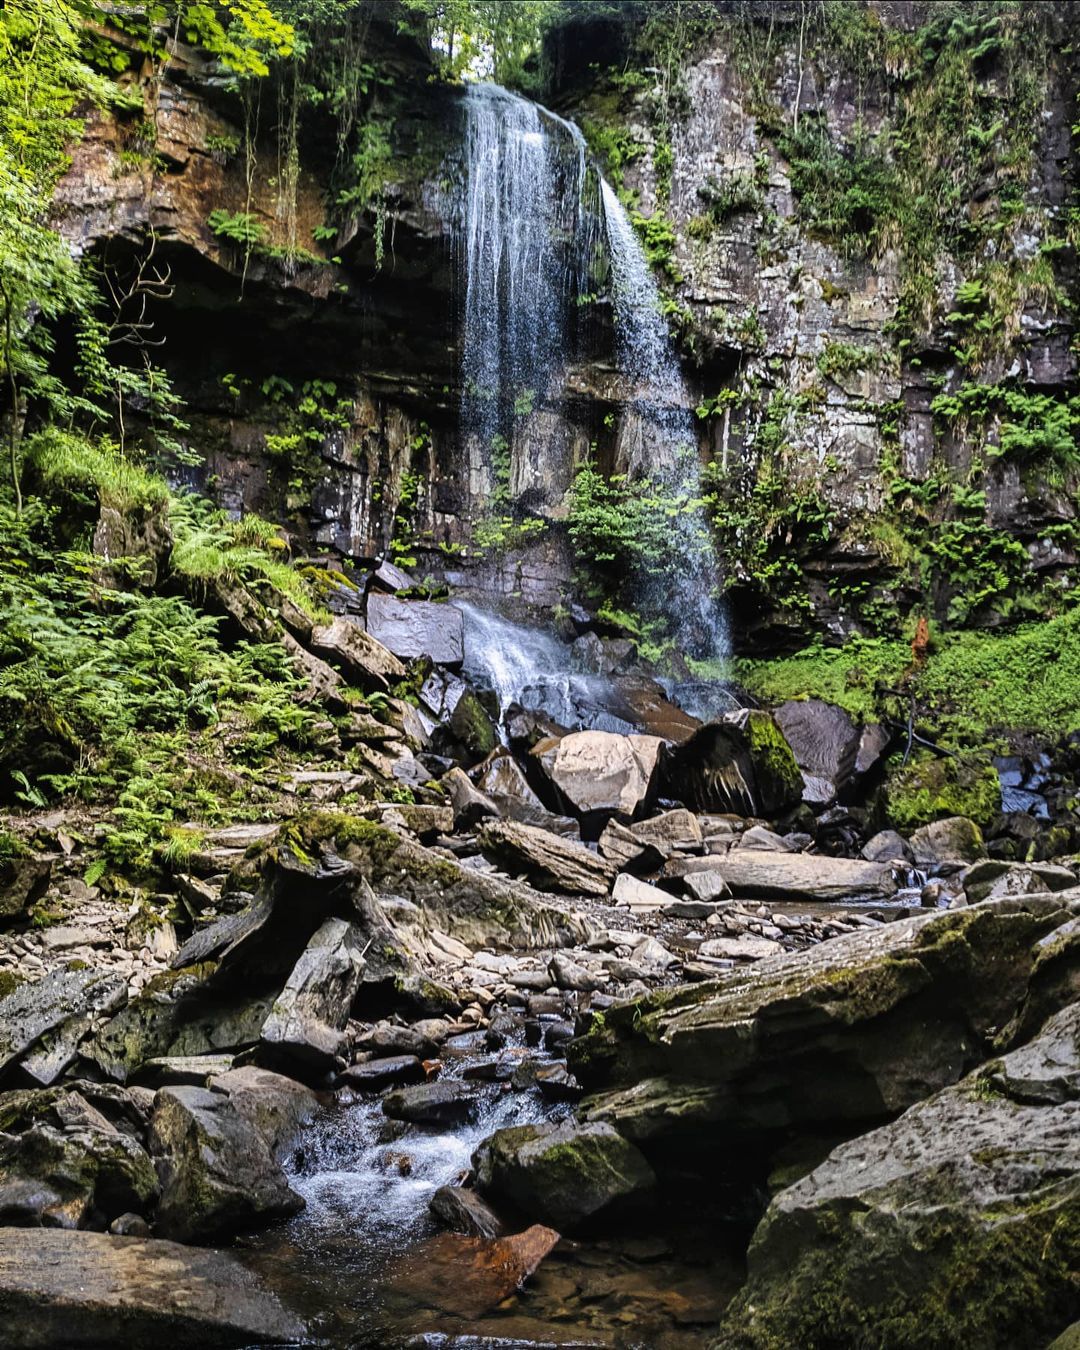 Melincourt Waterfall, the lesser visited waterfall of South Wales.
#melincourtwaterfall #melincourt #resolven #neath #neathvalley #waterfall #southwales #wales (at Melincourt Falls)
https://www.instagram.com/p/CQ_iSWMDYkX/?utm_medium=tumblr